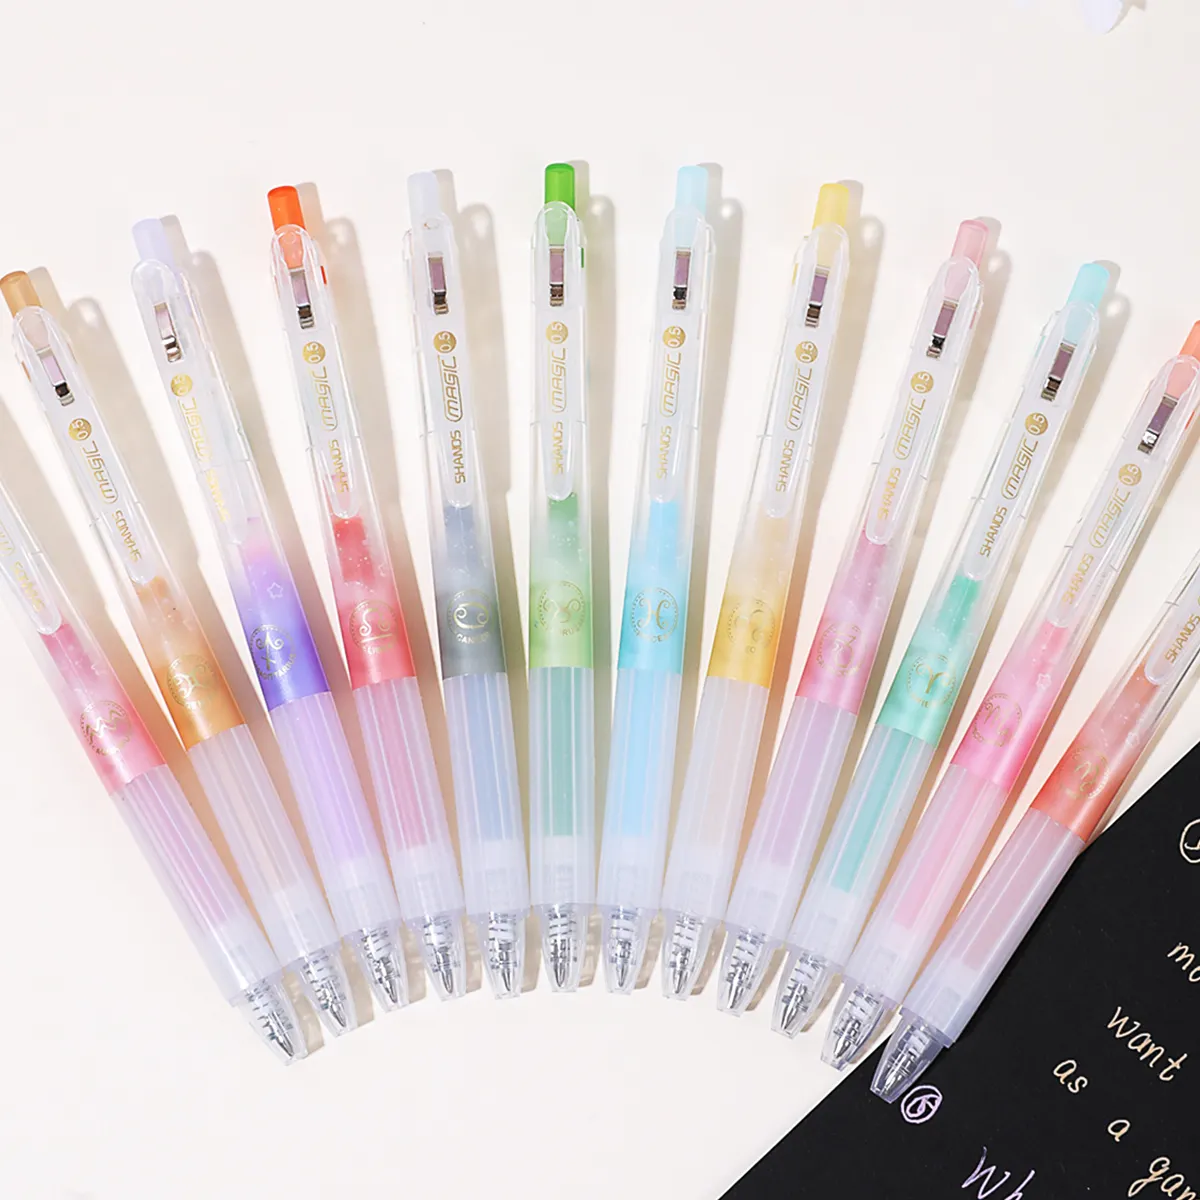 SHANDS Twelve Constellation Color Press Gel Pens 0.5mm Bullet Tip Durable and Stylish Writing Tool